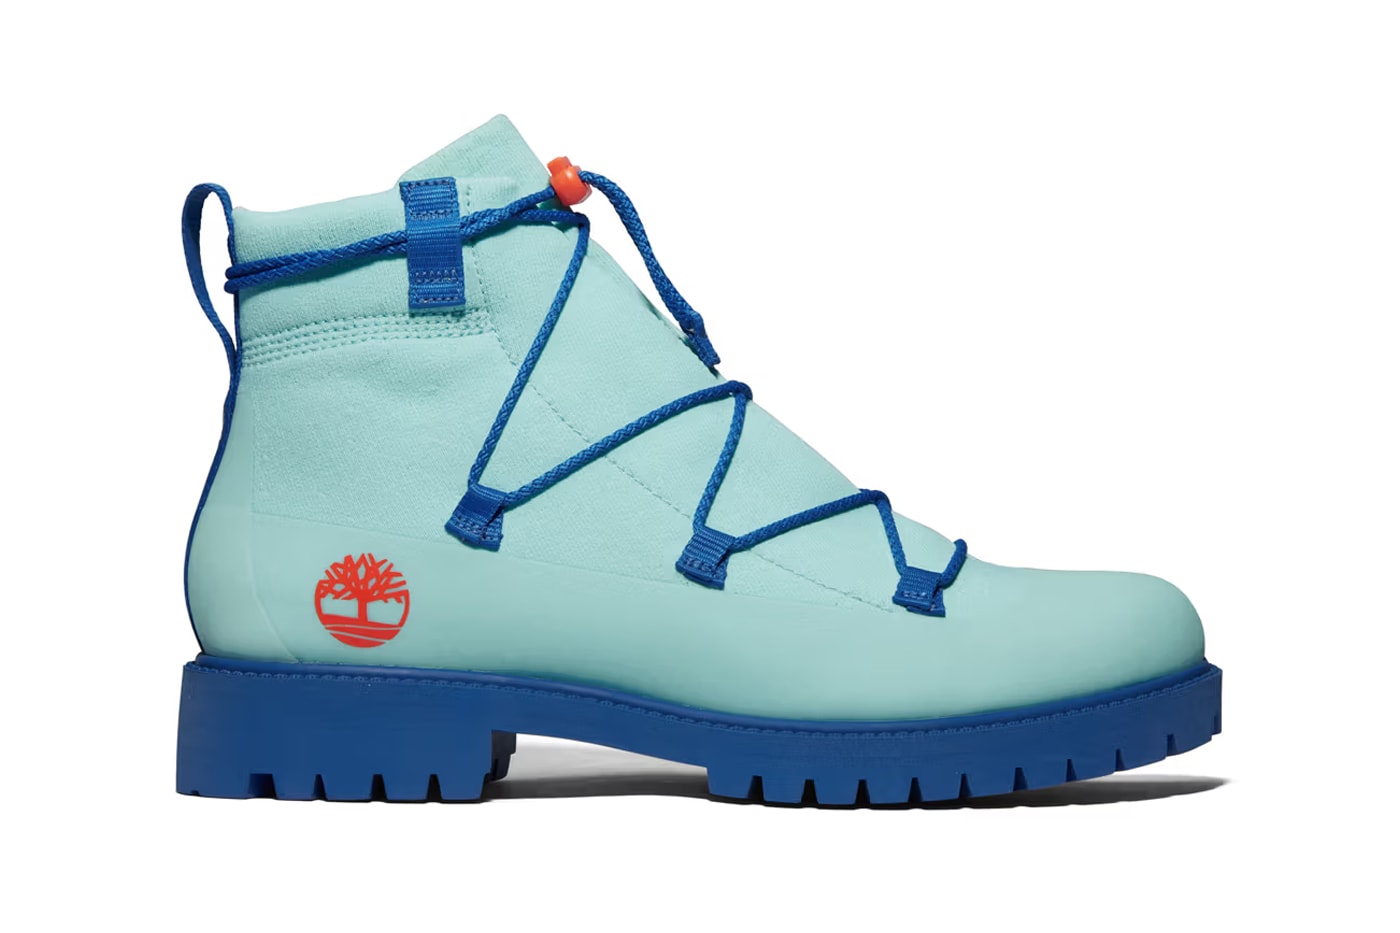 Timberland Suzanne Oude Hengel "Future73" Capsule Collection Knitwear Apparel Footwear Clog Boot